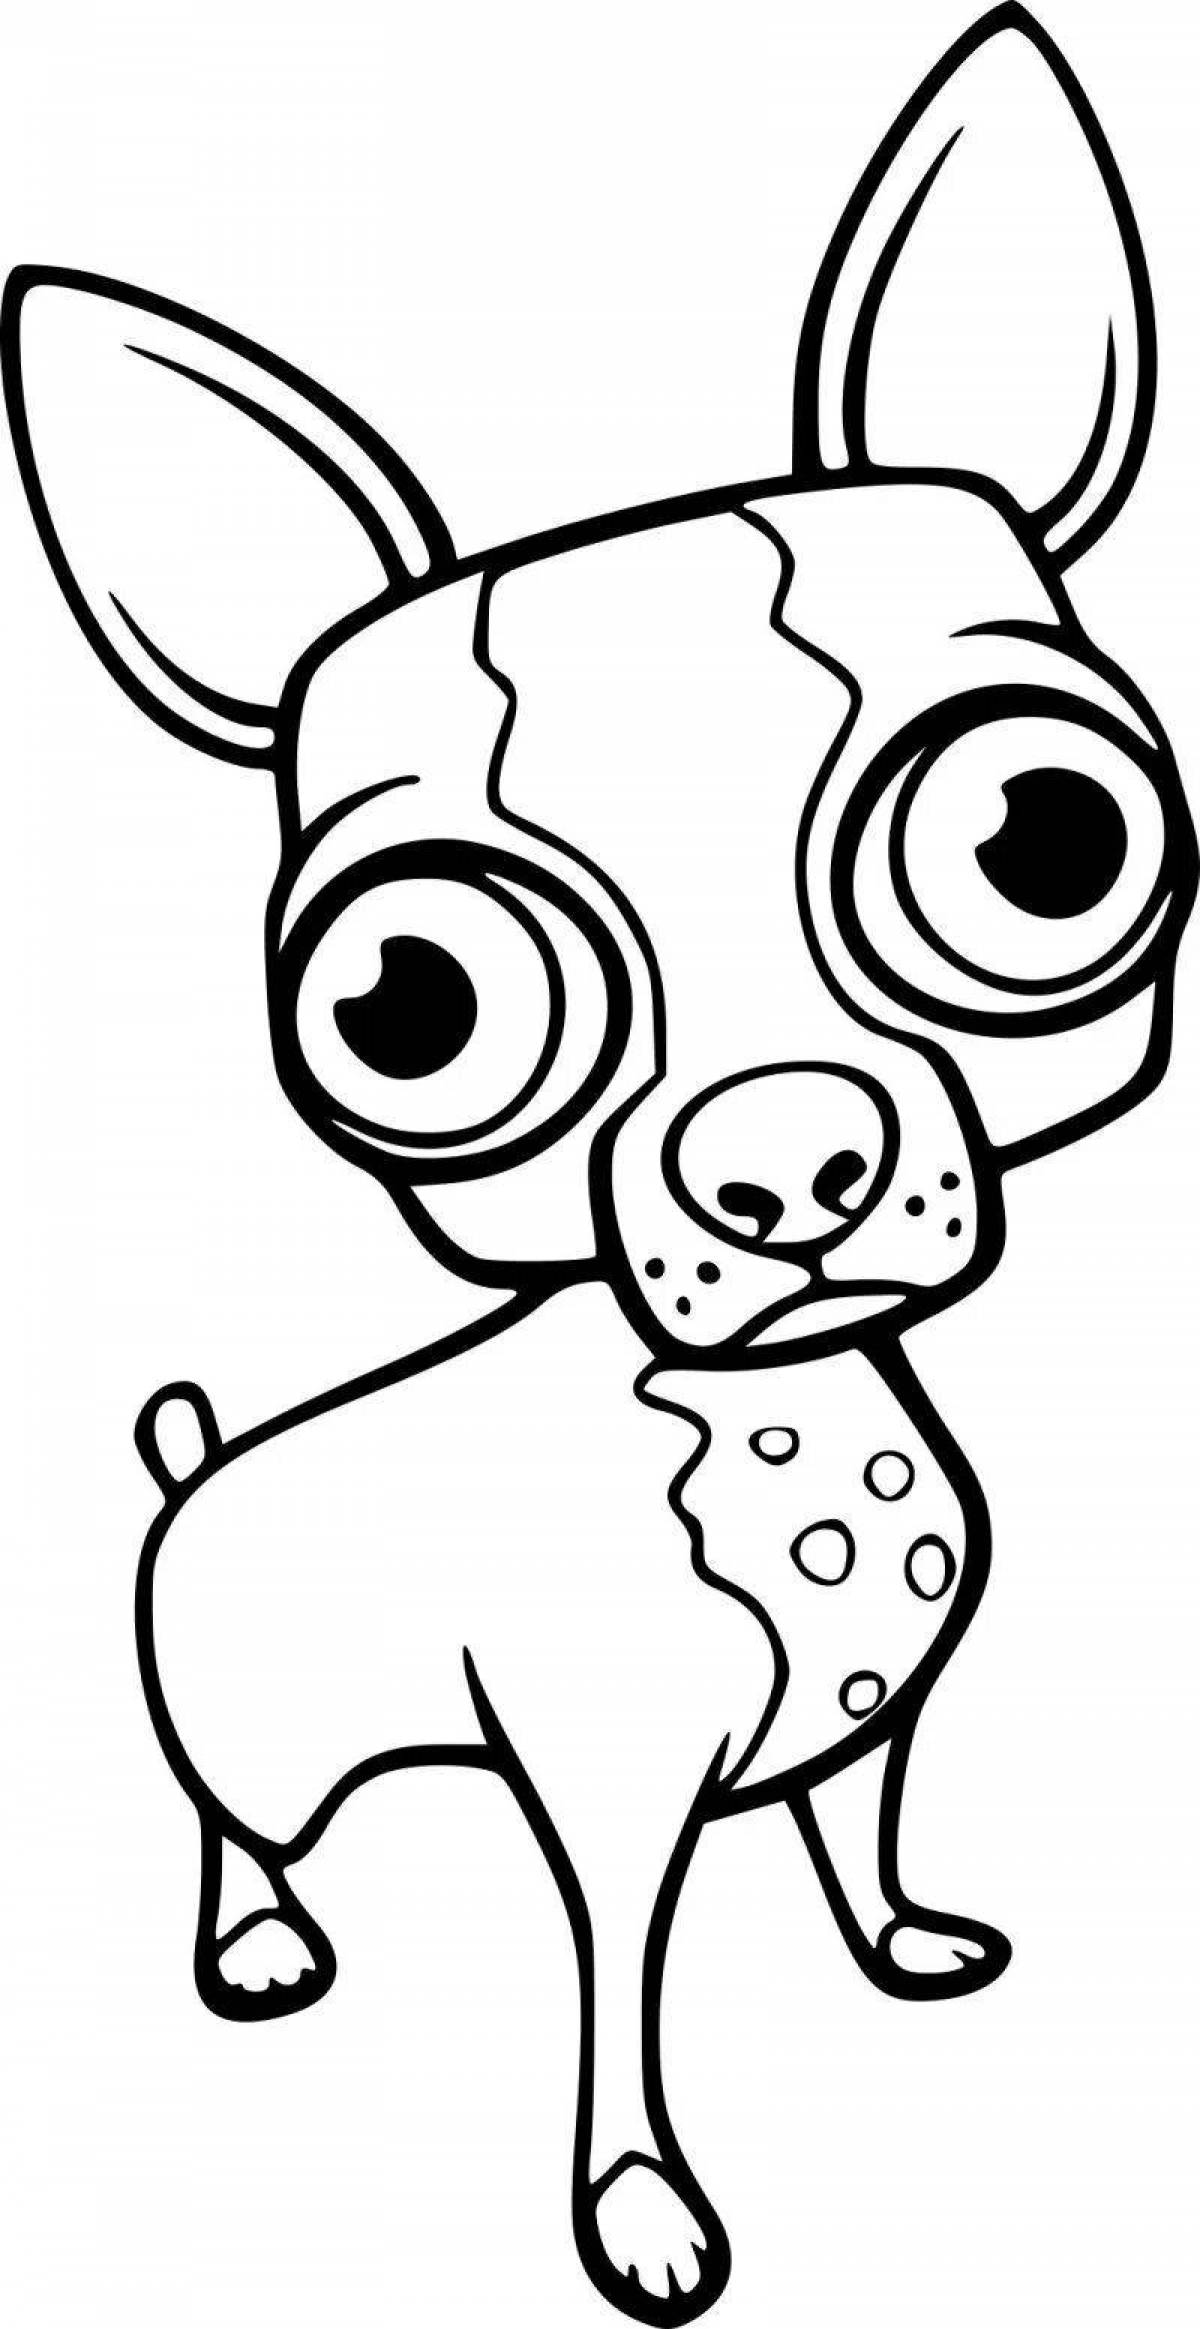 Coloring page funny miniature pinscher